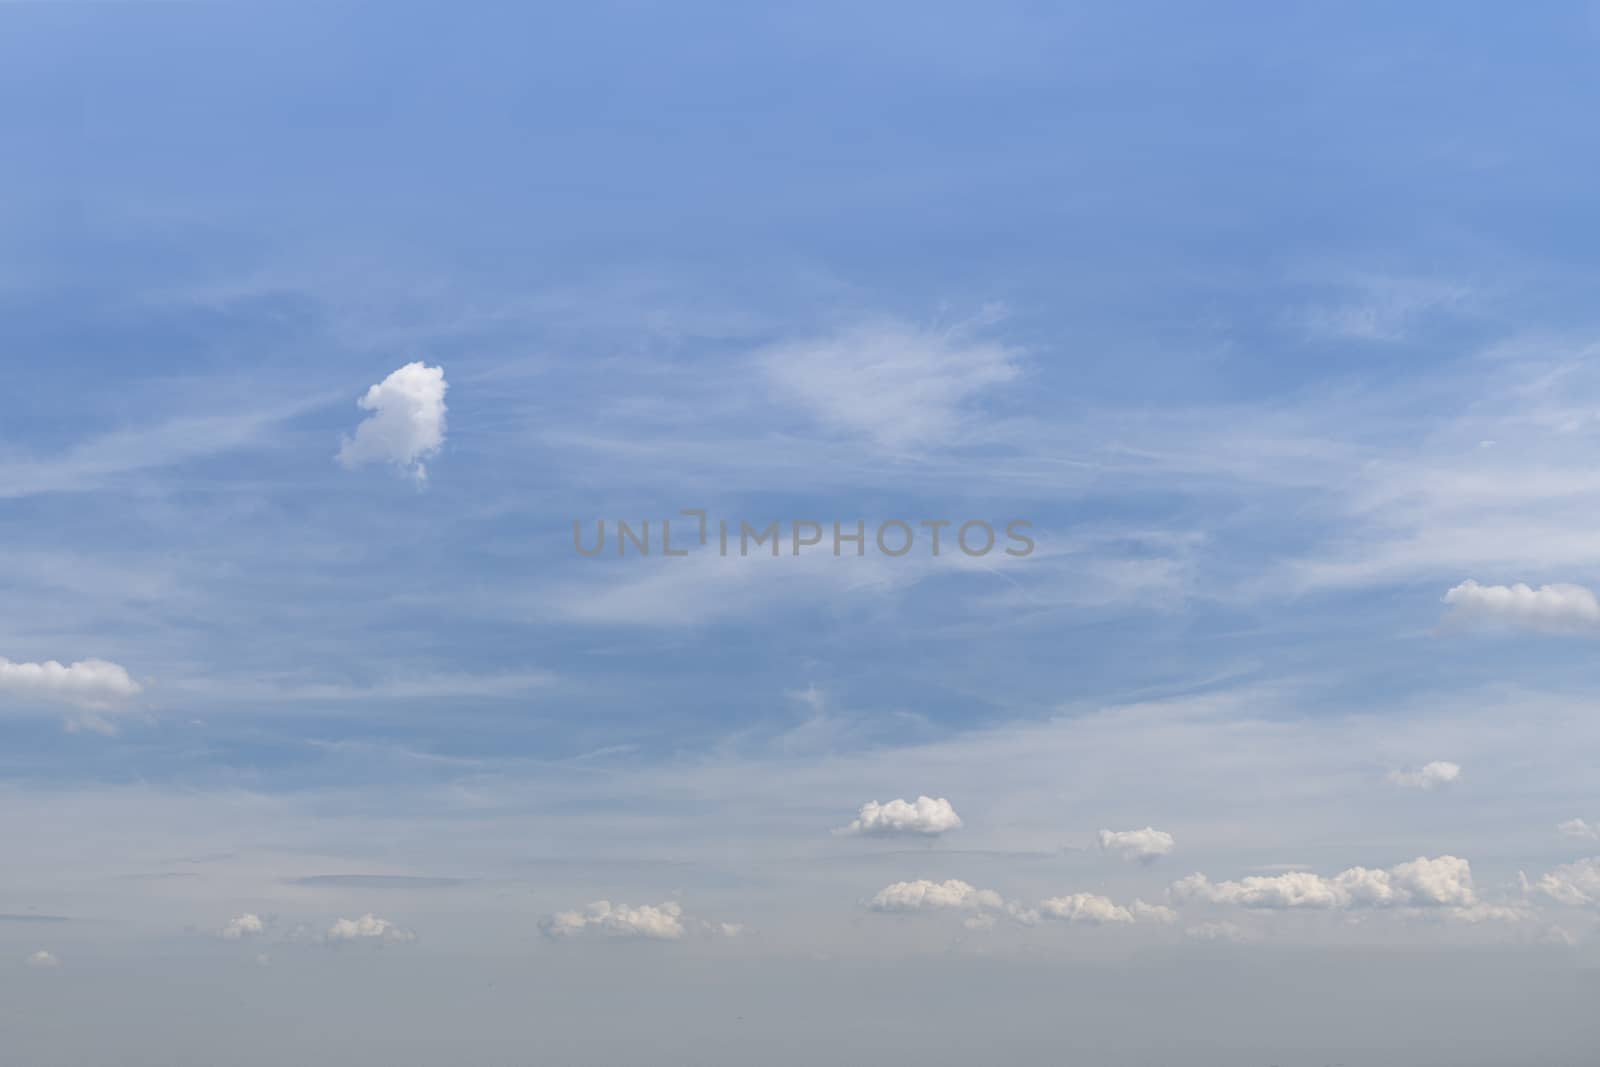 View of the beginning of the cumulonimbus clouds during the warm and wet weather with thick fog at the horizon